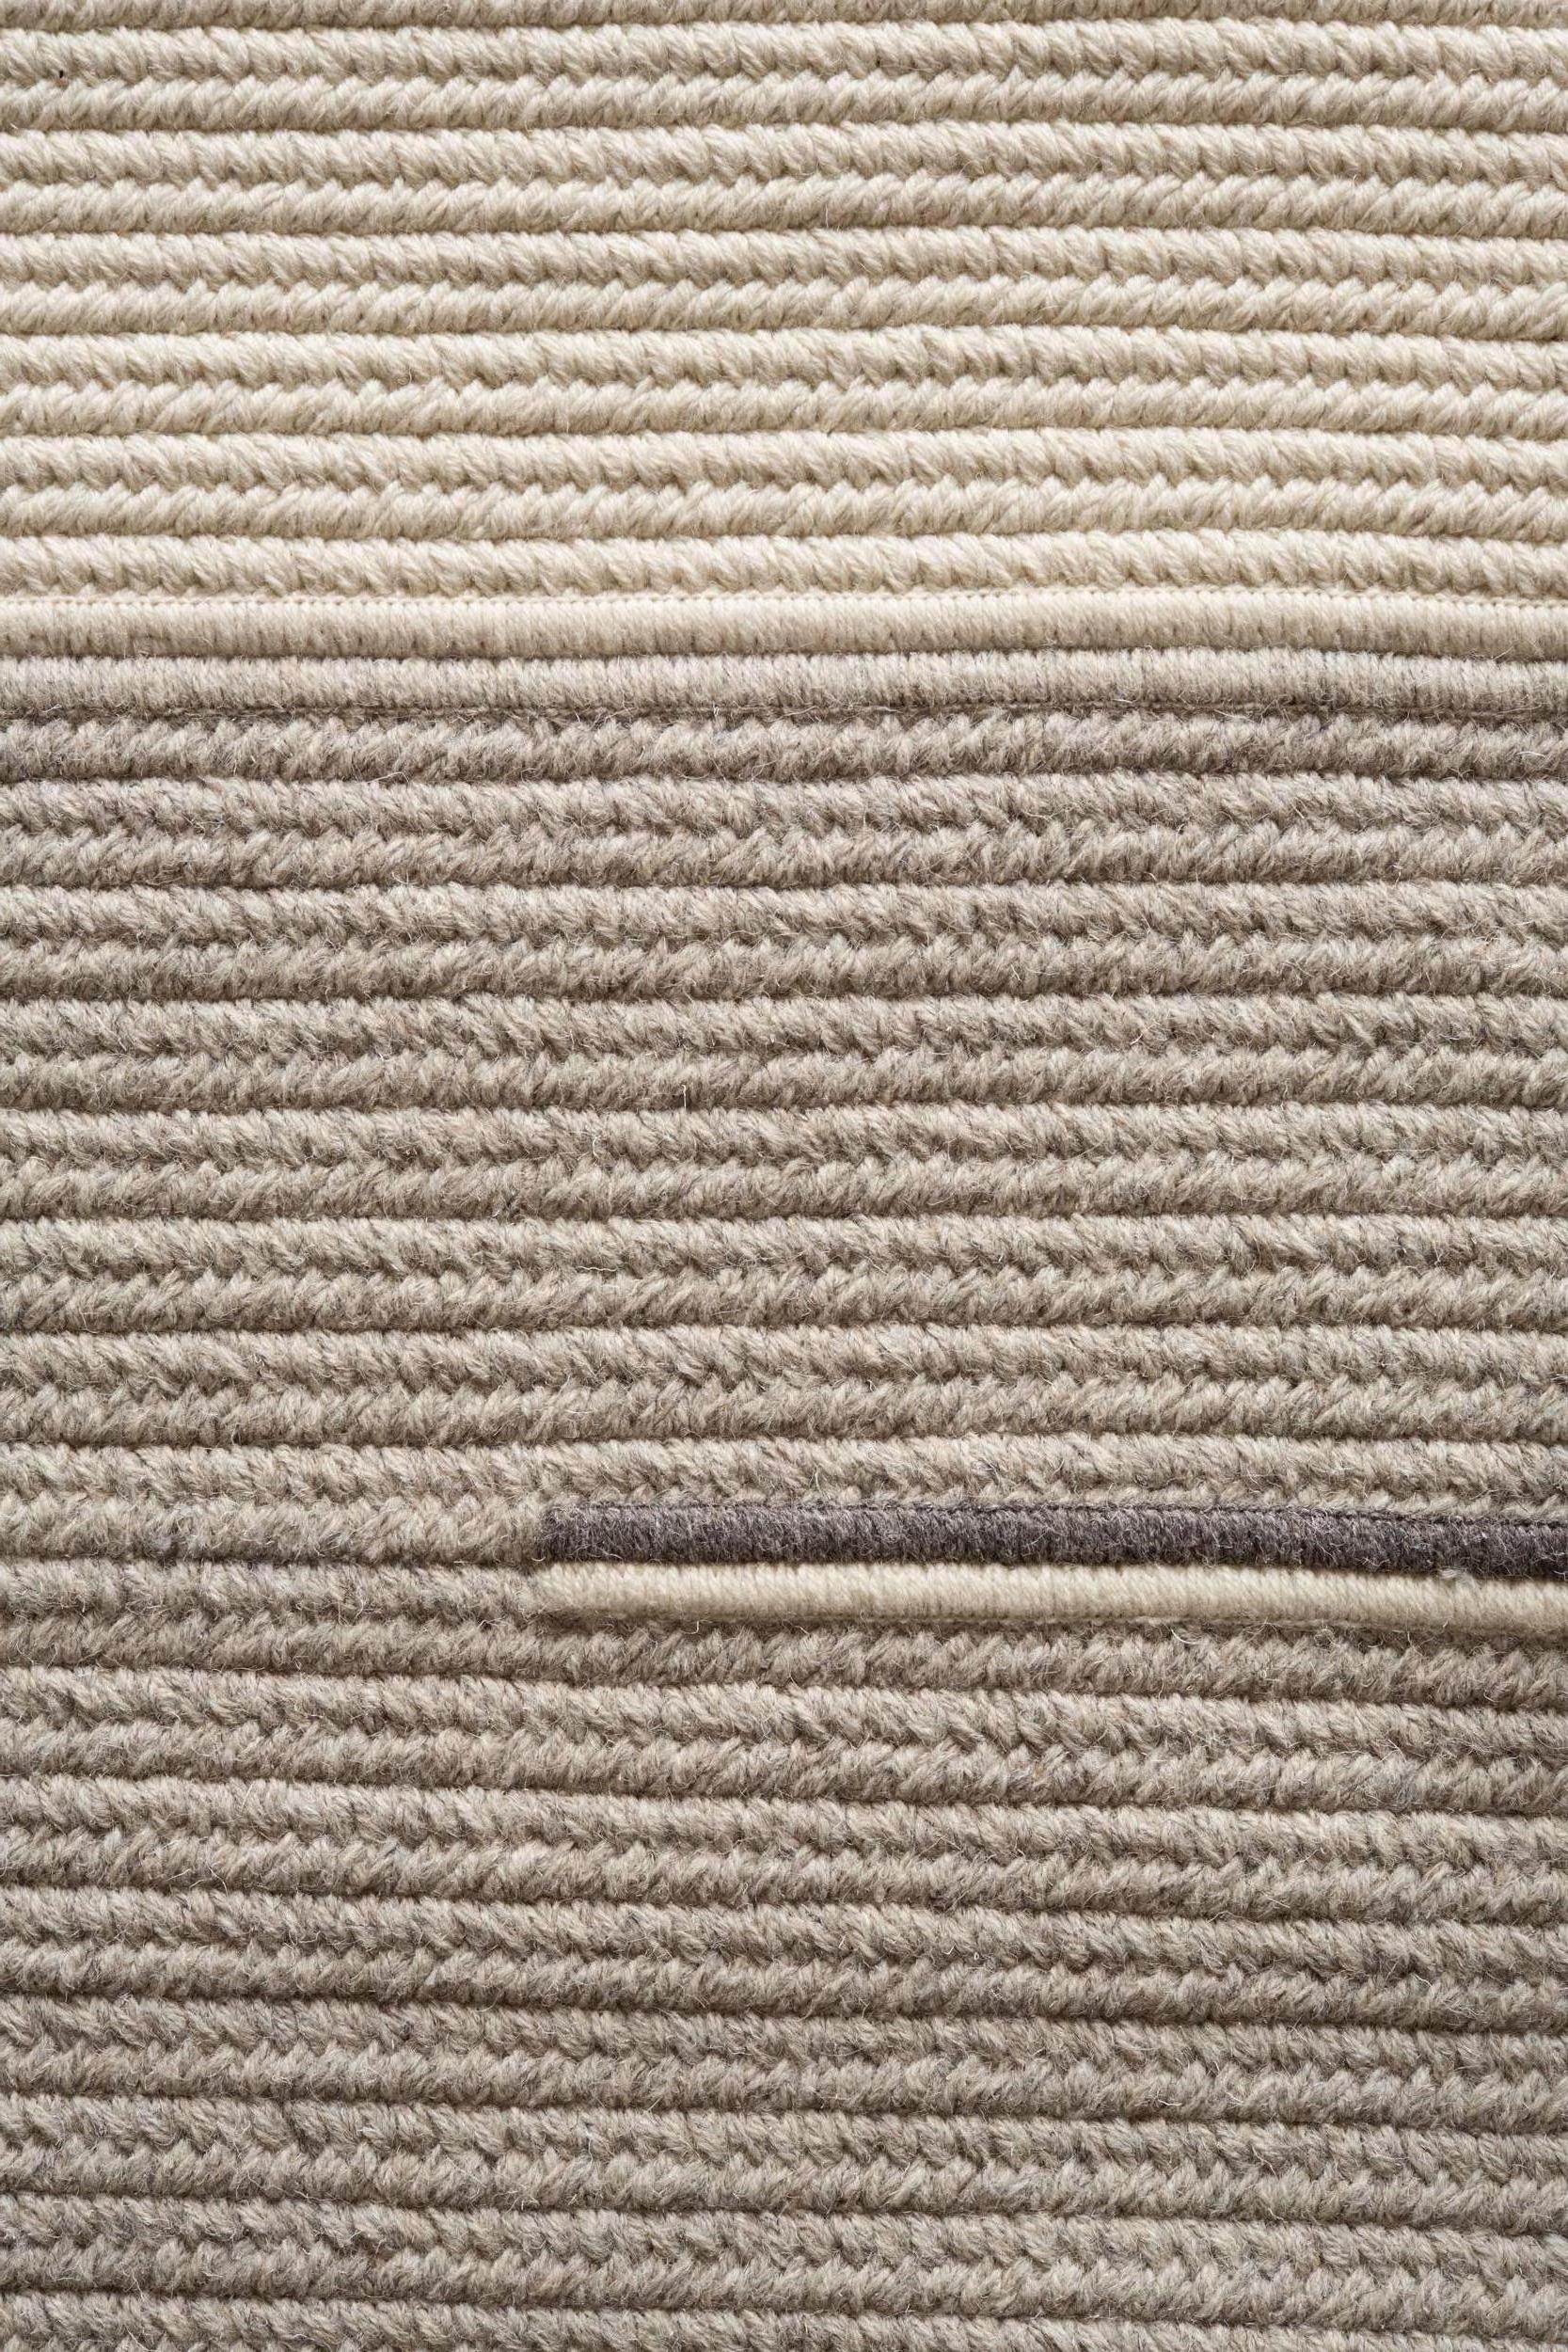 Line No. 1 light grey chunky textured natural-undyed wool 8'x10' reversible rug, designed and crafted in the USA.

The Line No. 1 rug is a Minimalist inspired rug focused on creating texture and balance through line and material. Each piece is